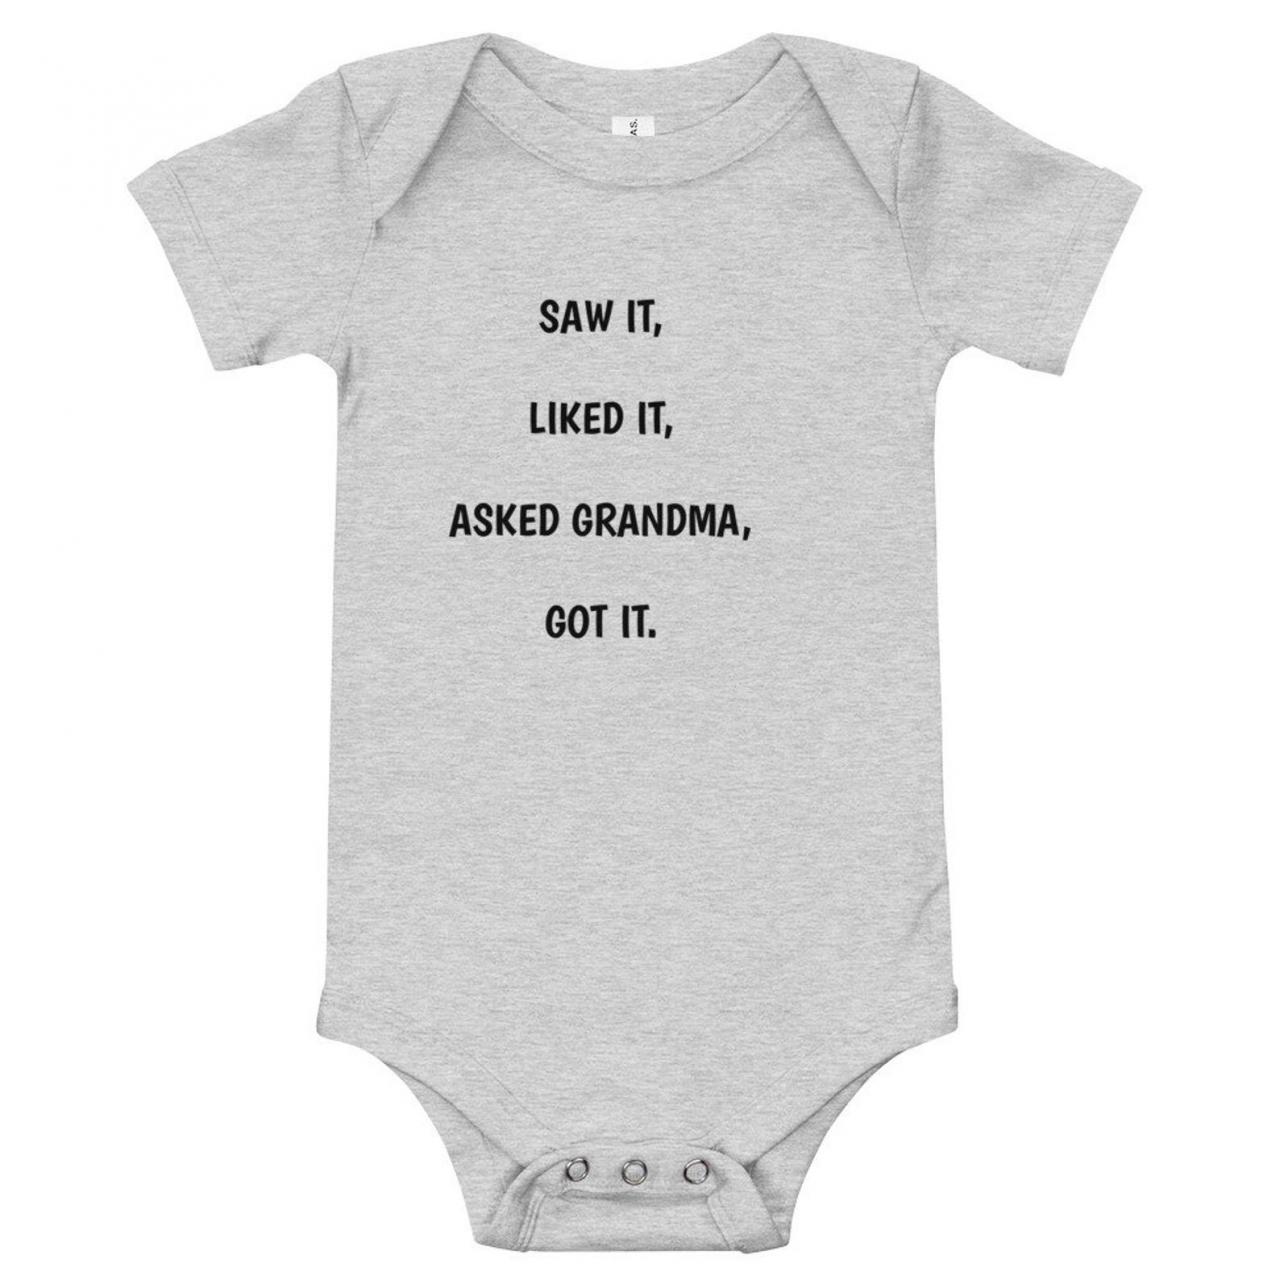 Saw It, Liked It, Asked Grandma, Got It.funny Baby Onesies®, Baby Shower Gift, Funny Baby Bodysuit